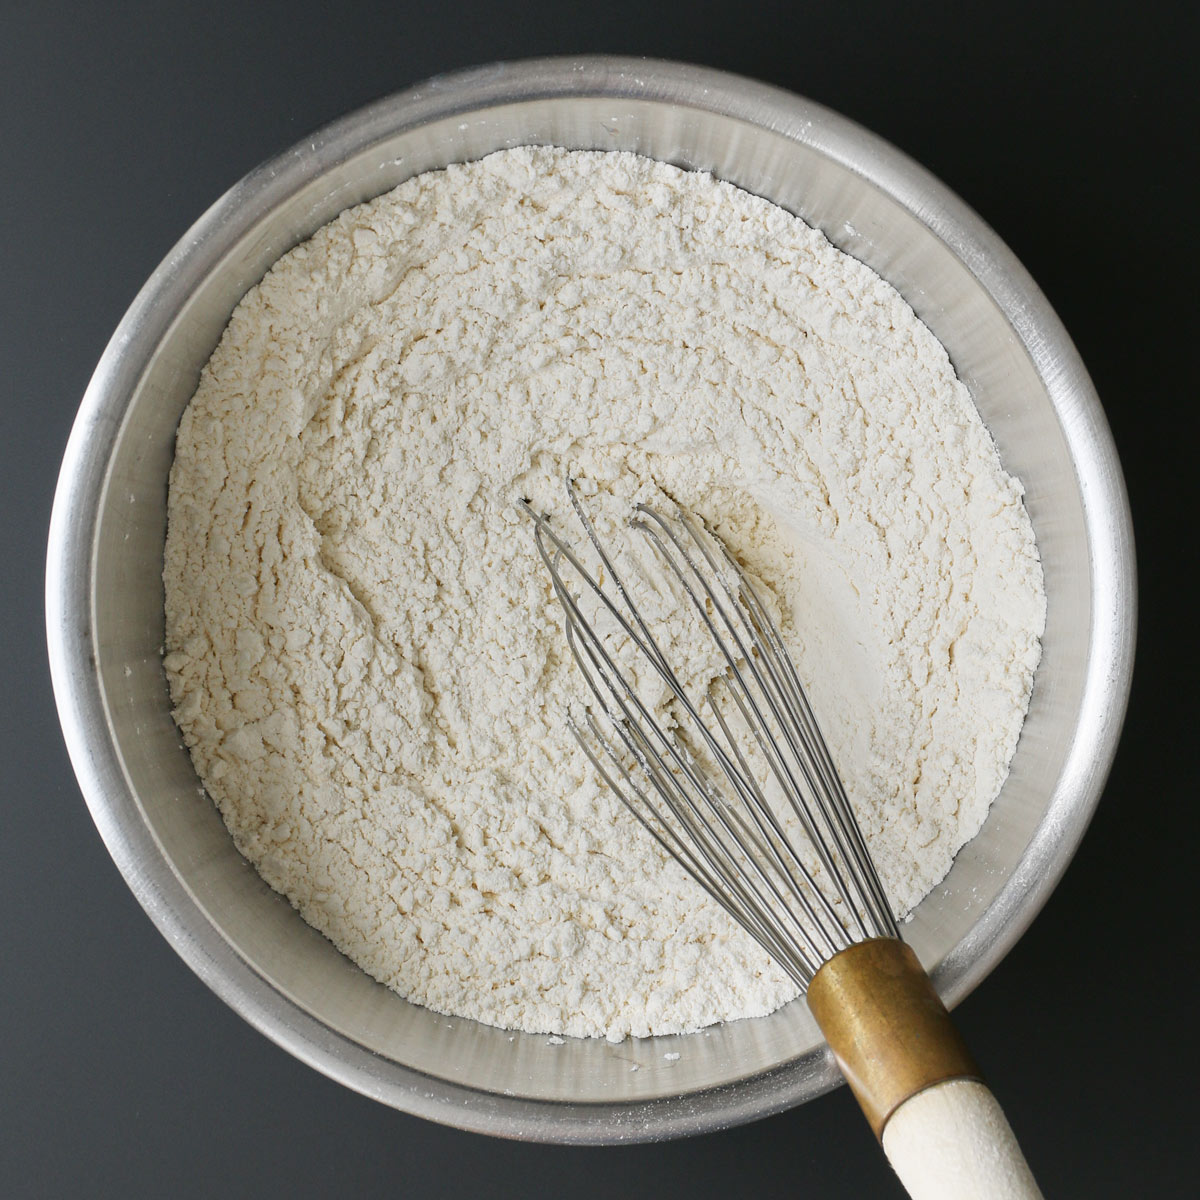 dry ingredients whisked together in mixing bowl, with whisk.